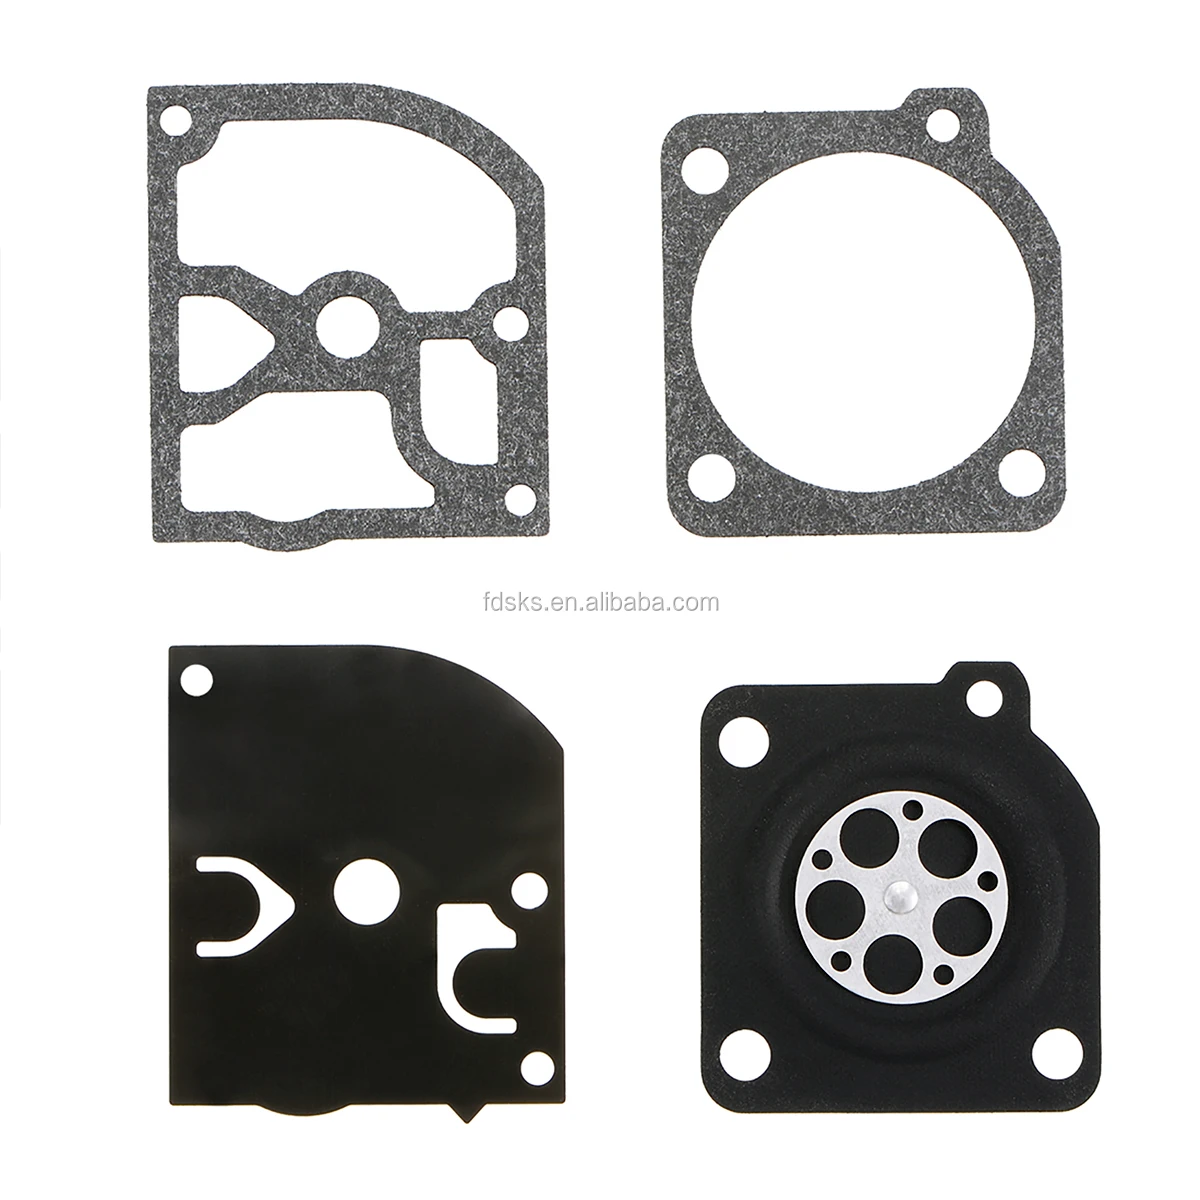 For Zama RB-105 C1Q-S Serires Carburetor Repair Kit For Stihl MS250 Chainsaw 